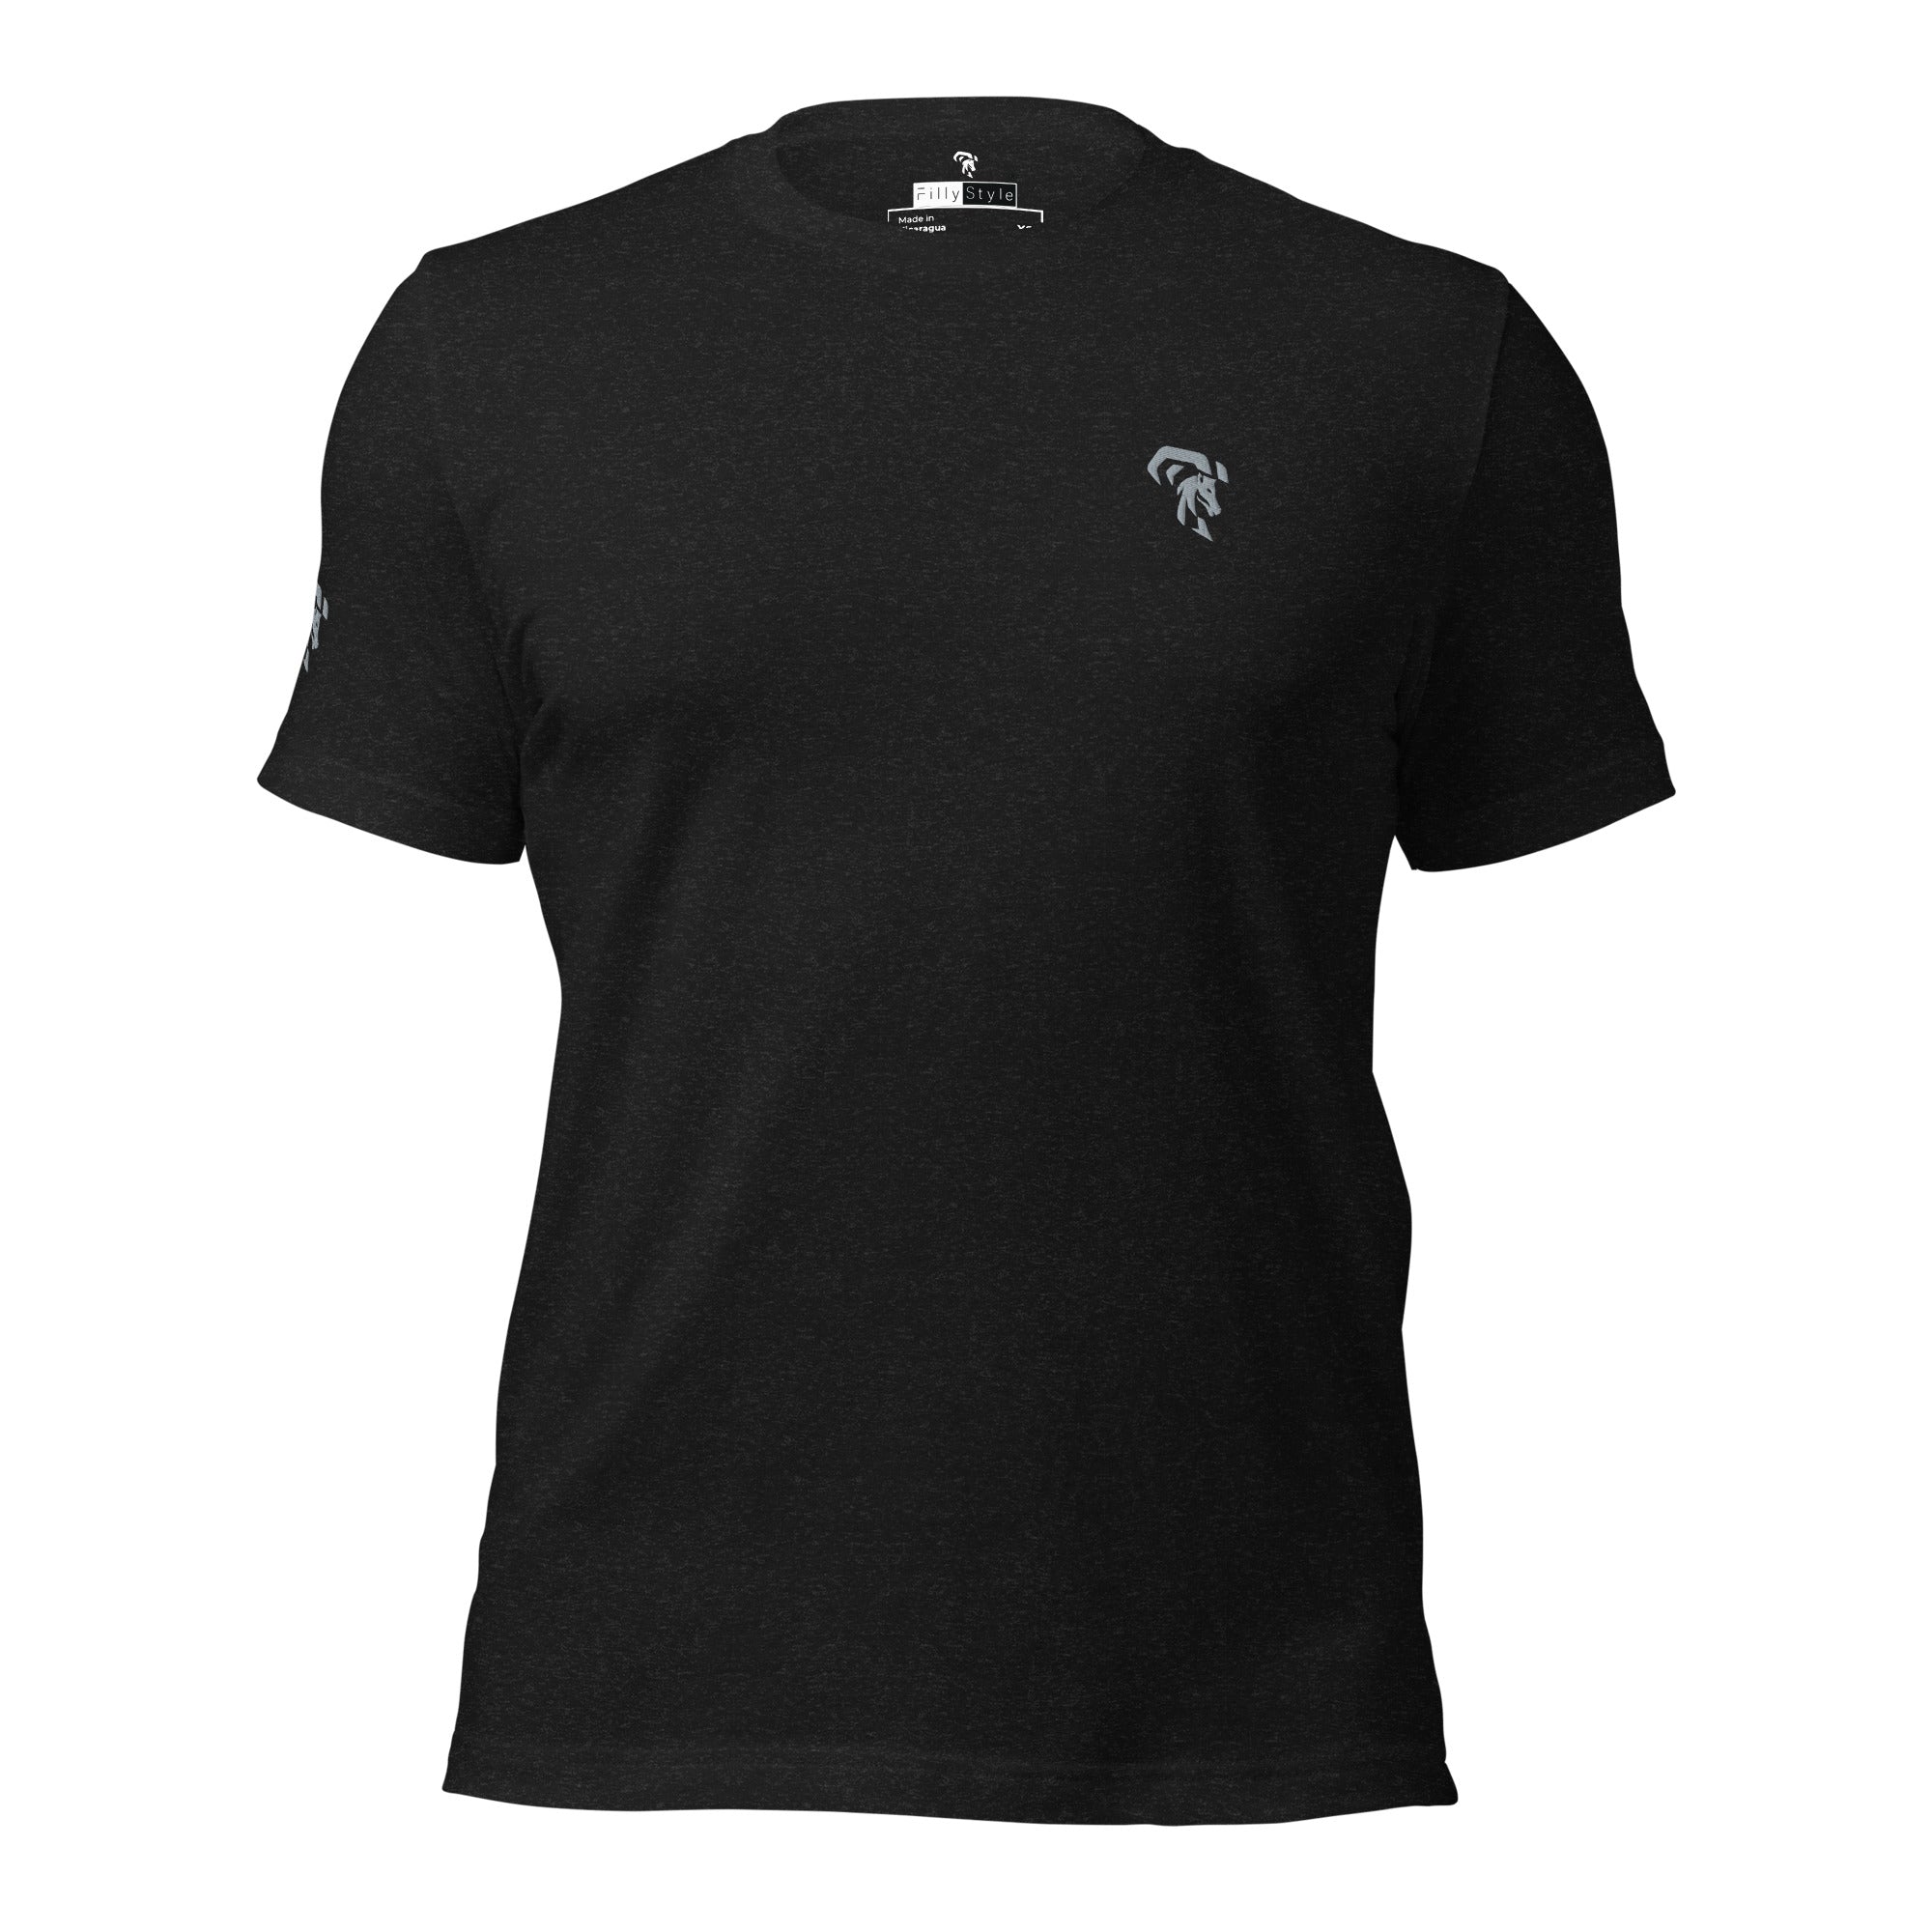 Unisex Filly Style Staple T-Shirt: Comfort and Versatility Combined